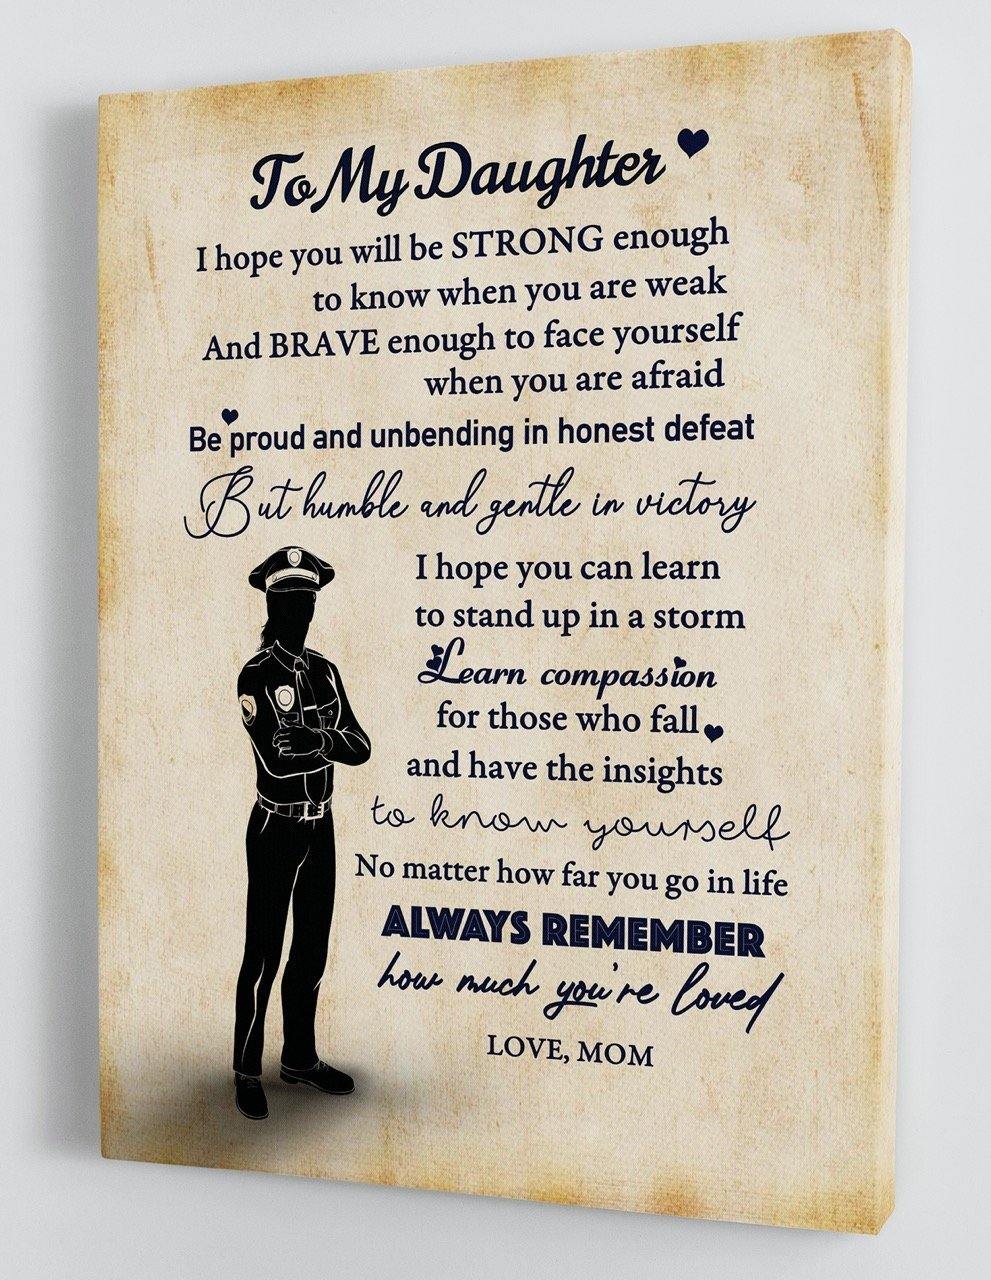 To My Daughter - From Mom - Police Framed Canvas Gift MD013 - DivesArt LLC